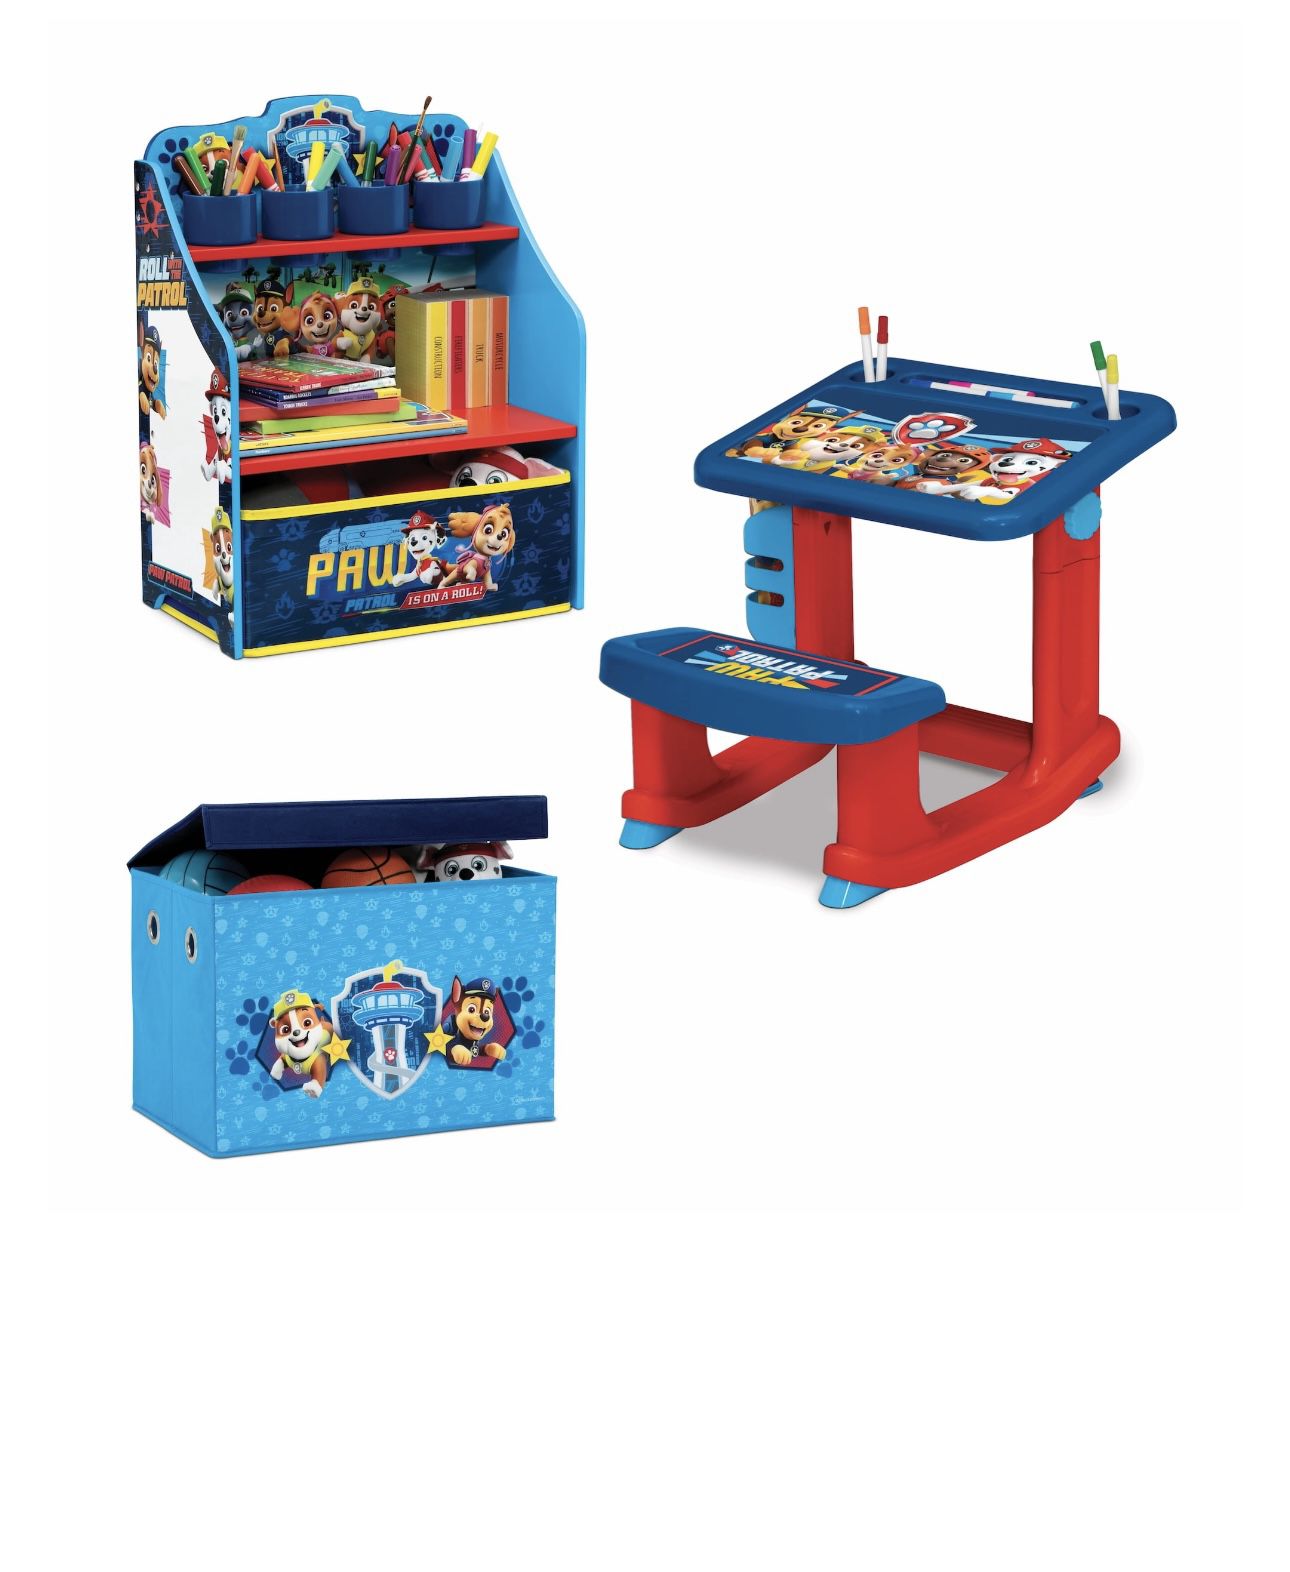 PAW Patrol 3-Piece Art & Play Toddler Room-in-a-Box by Delta Children – Includes Draw & Play Desk, Art & Storage Station & Fabric Toy Box